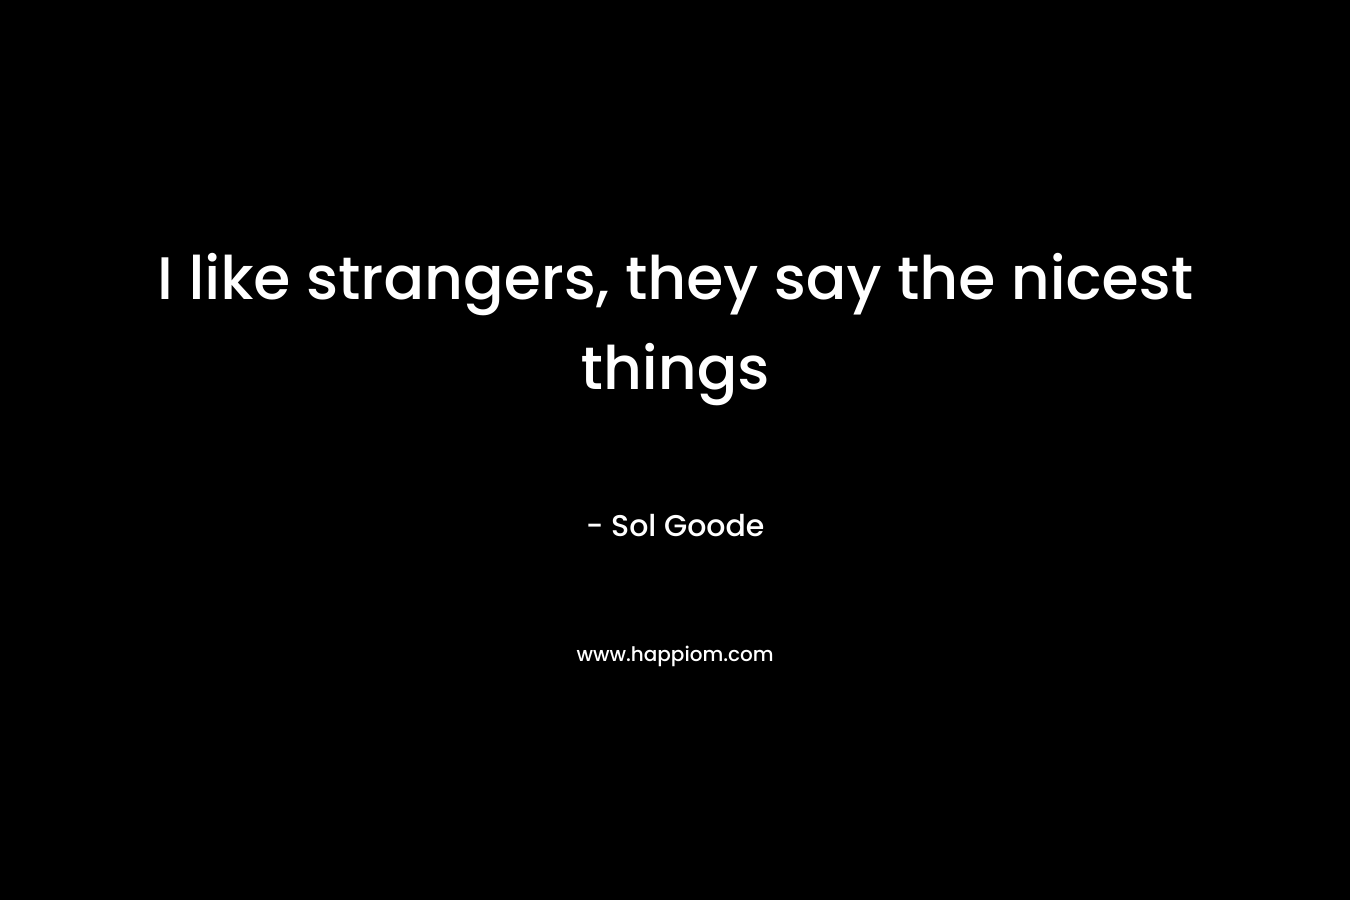 I like strangers, they say the nicest things – Sol Goode